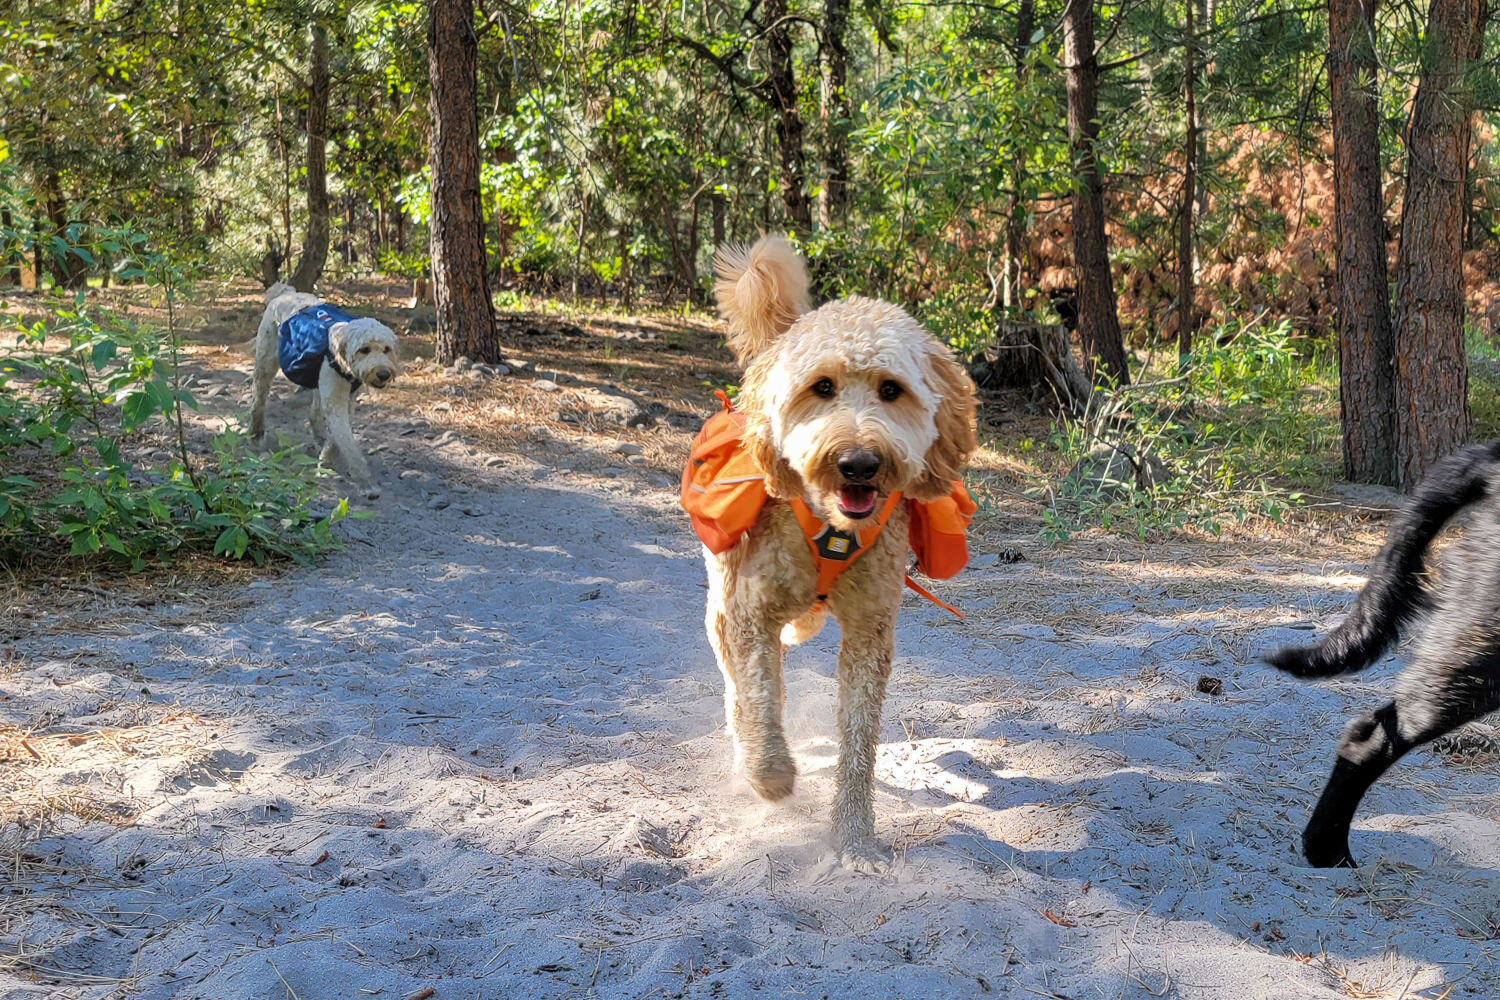 The Ruffwear Approach is a spacious dog backpack that works well for larger breeds